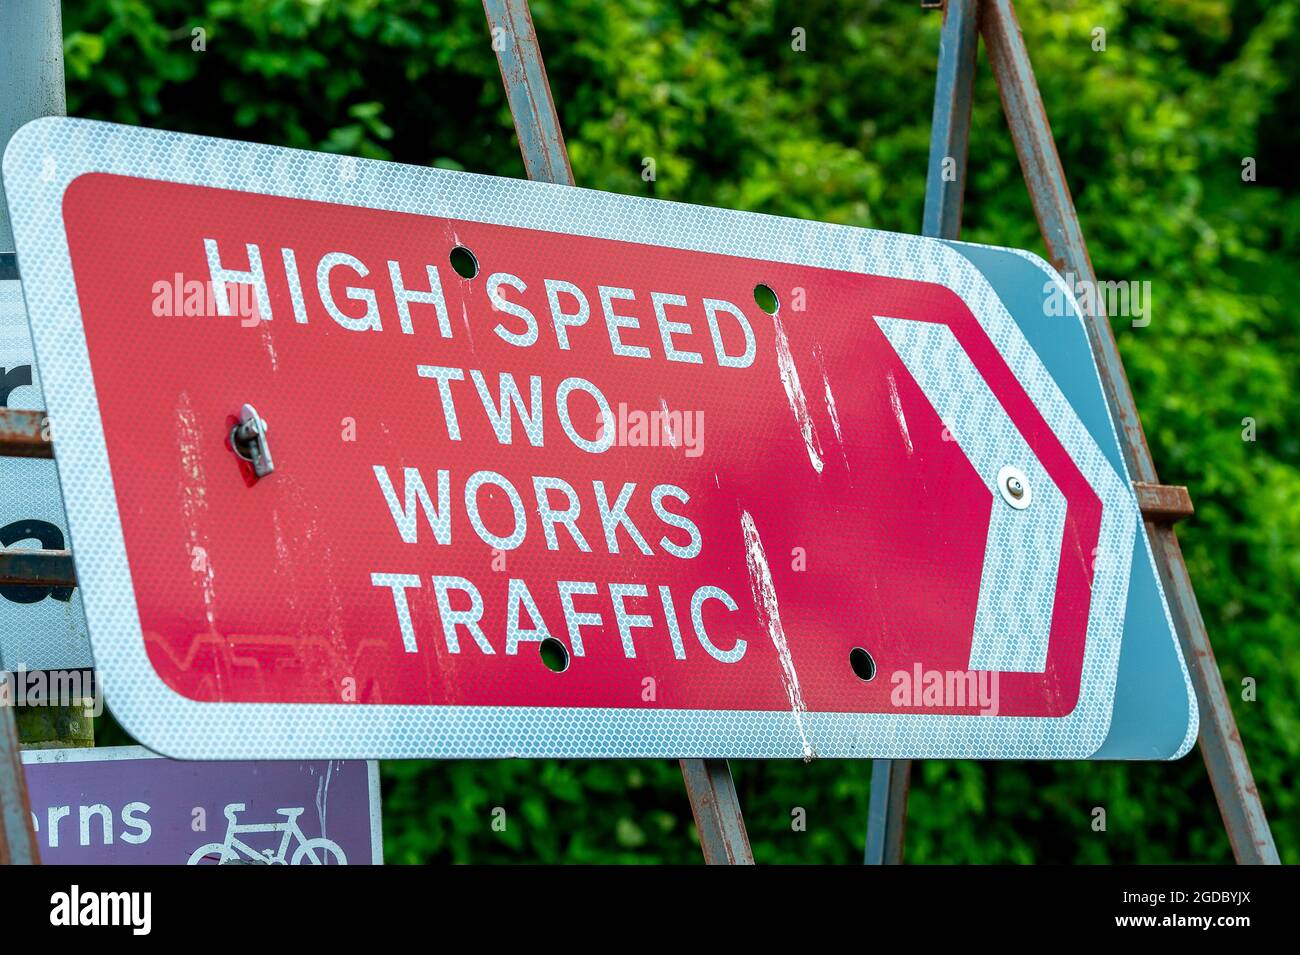 Wendover, Buckinghamshire, UK. 10th August, 2021. One of the many High Speed Two Works Traffic signs around Buckinghamshire for their numerous compounds. Credit: Maureen McLean/Alamy Stock Photo